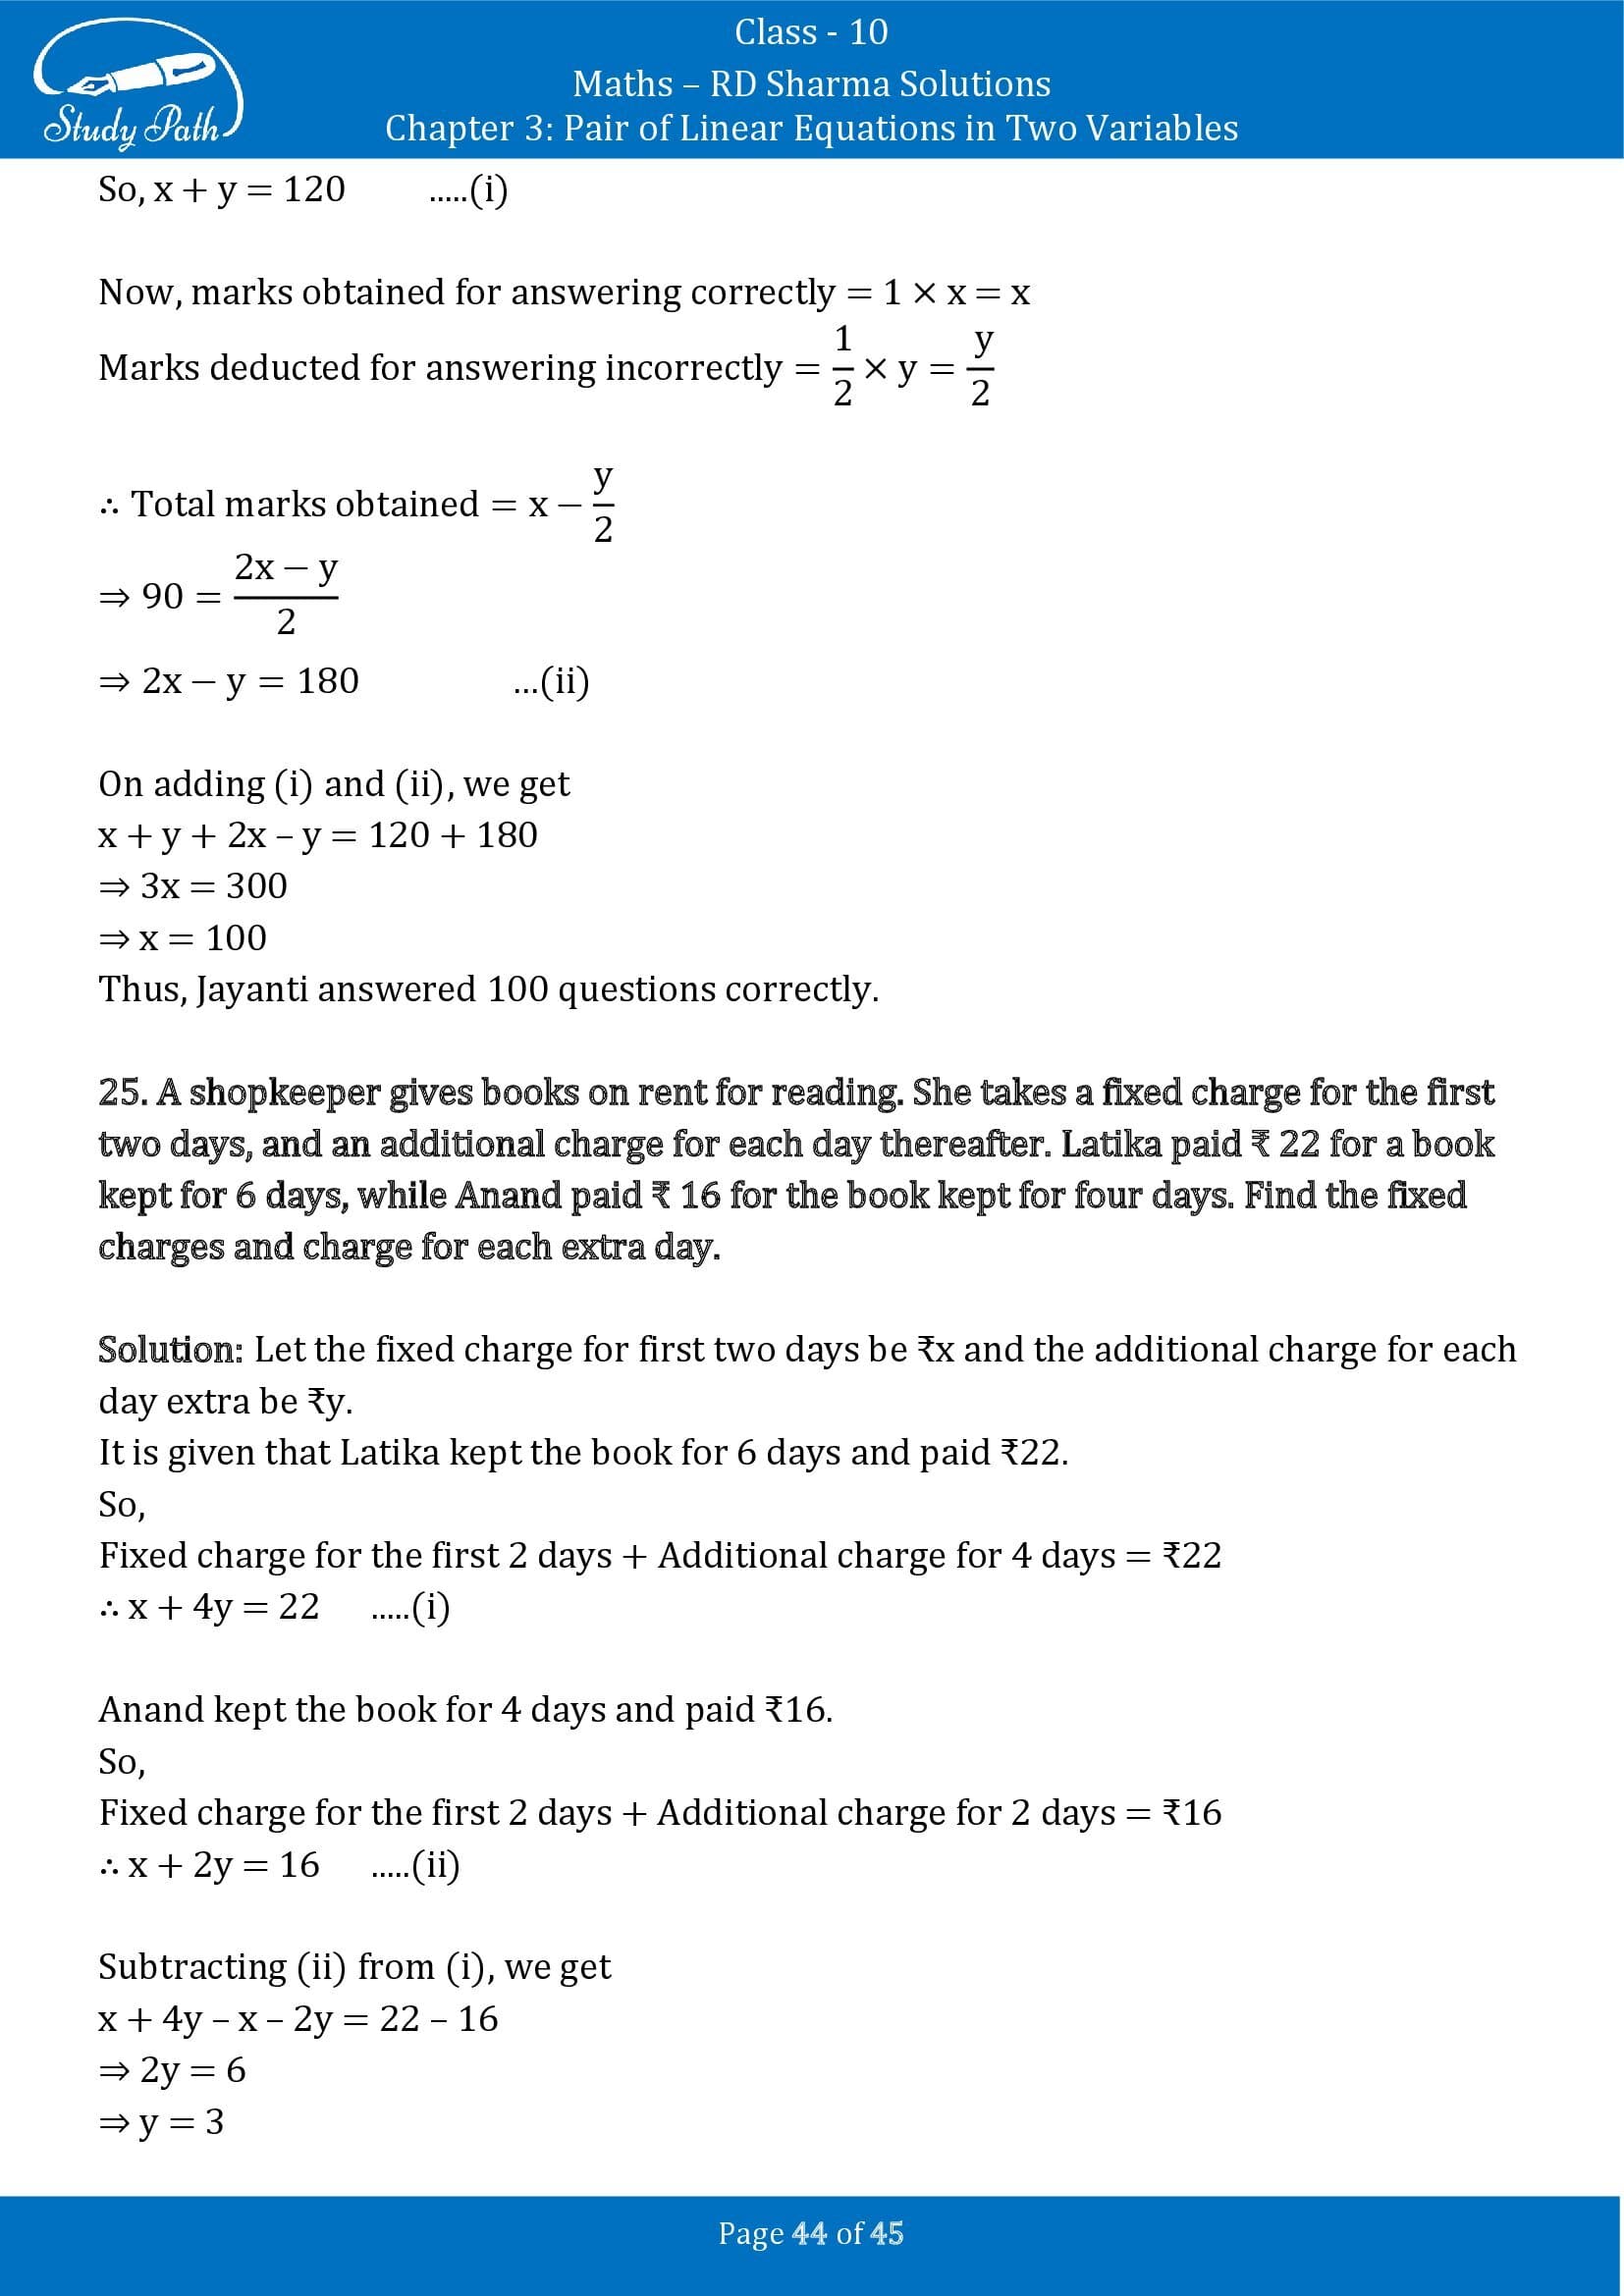 RD Sharma Solutions Class 10 Chapter 3 Pair of Linear Equations in Two Variables Exercise 3.11 00044